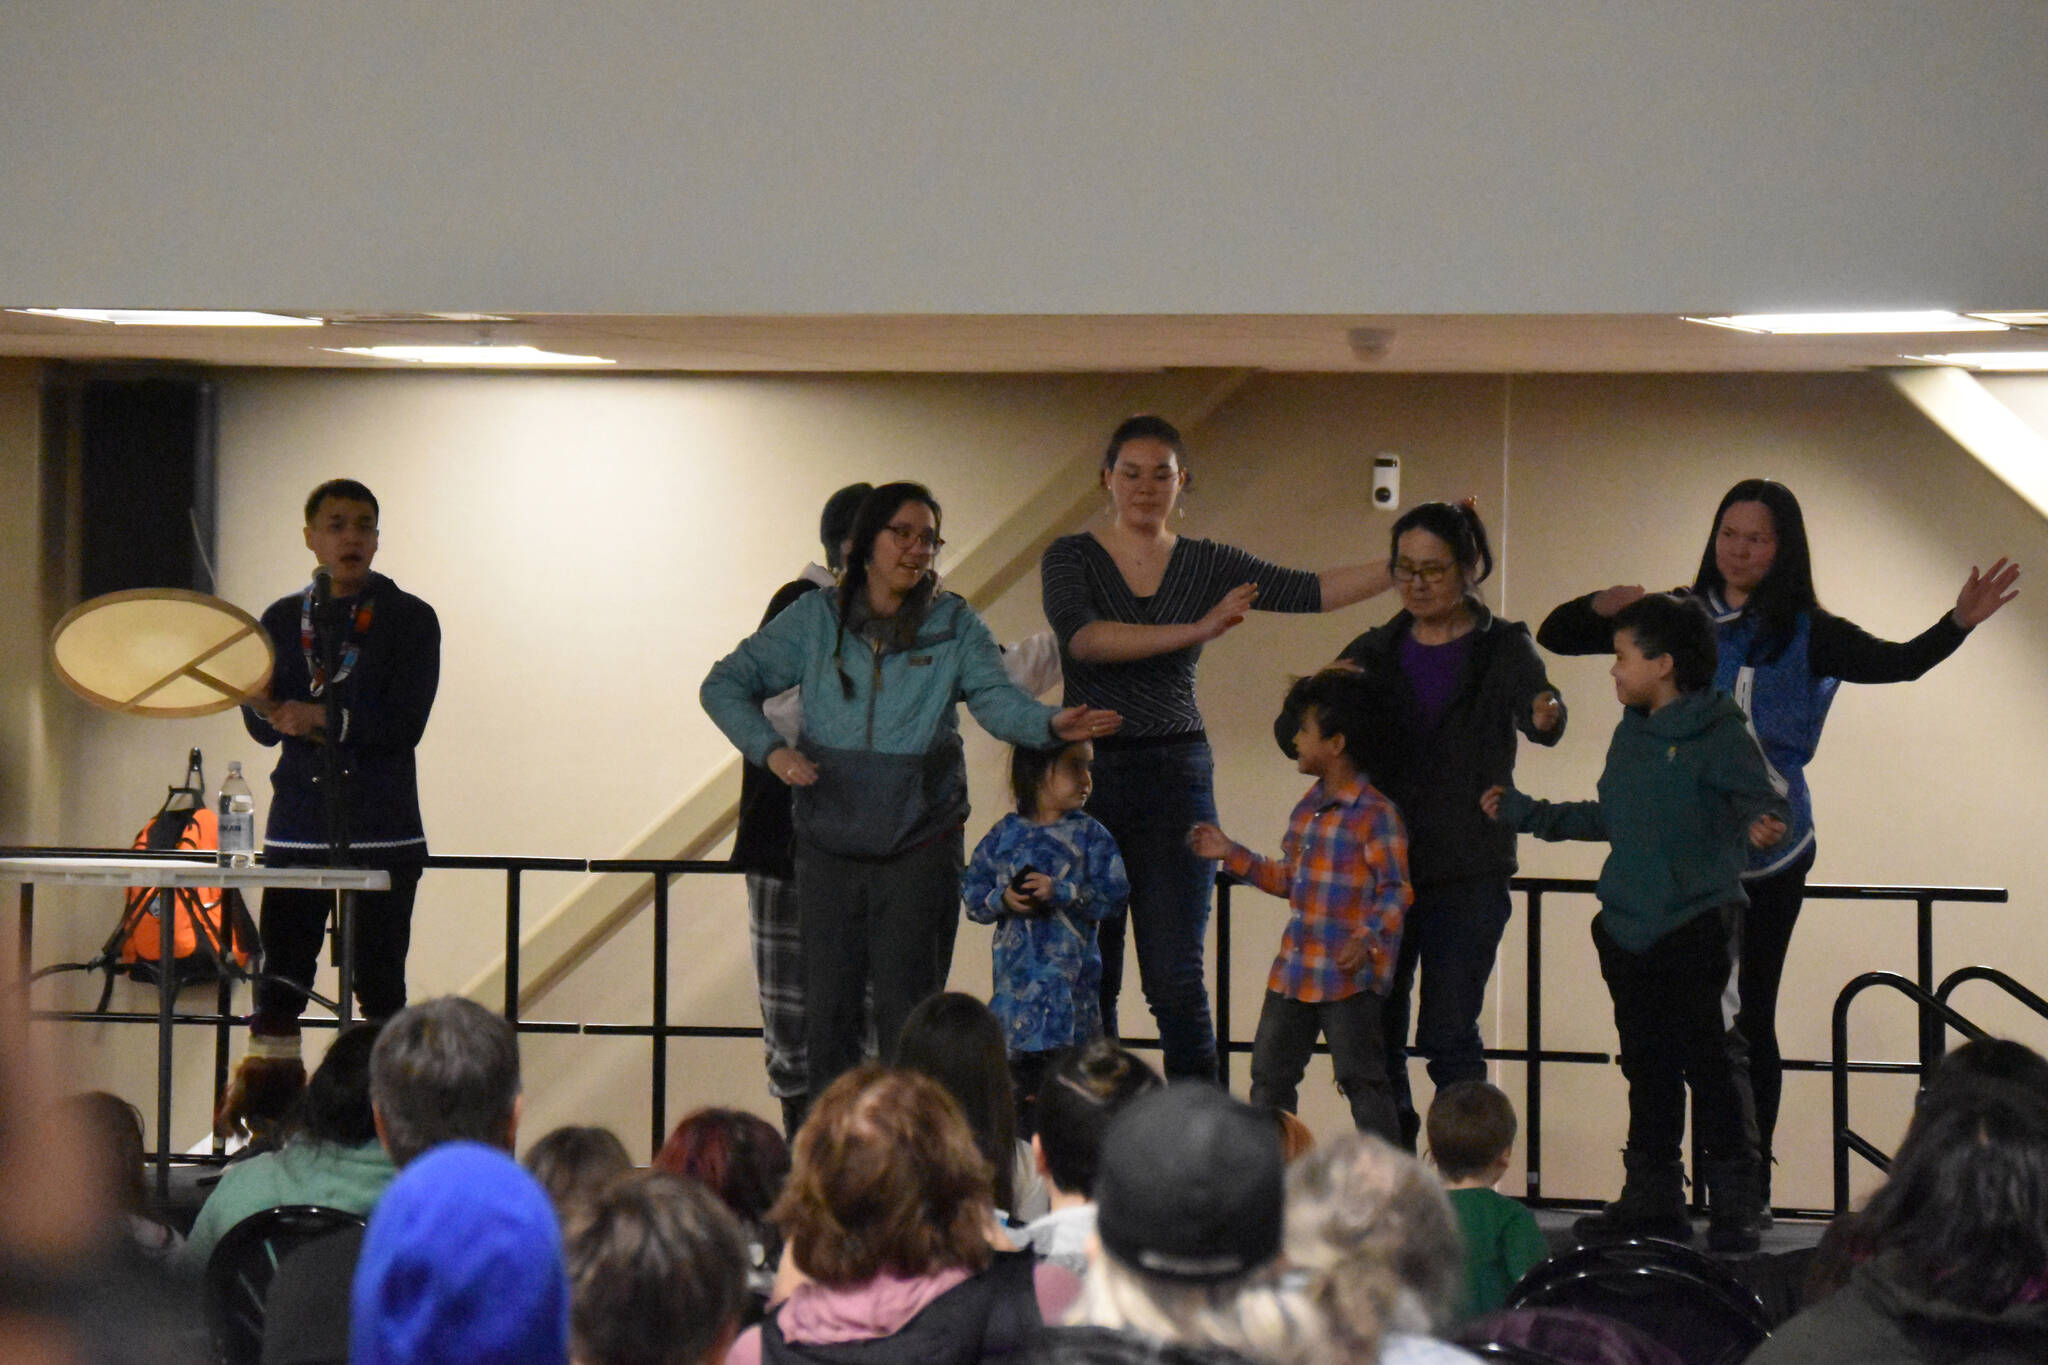 Byron Nicholai, of “I Sing, You Dance,” is joined on stage by members of the audience during a musical performance as part of the Kahtnuht’ana Hey Chi’ula NYO Invitational on Saturday, Jan. 14, 2023, at the Kahtnuht’ana Duhdeldiht Campus in Kenai, Alaska. (Jake Dye/Peninsula Clarion)